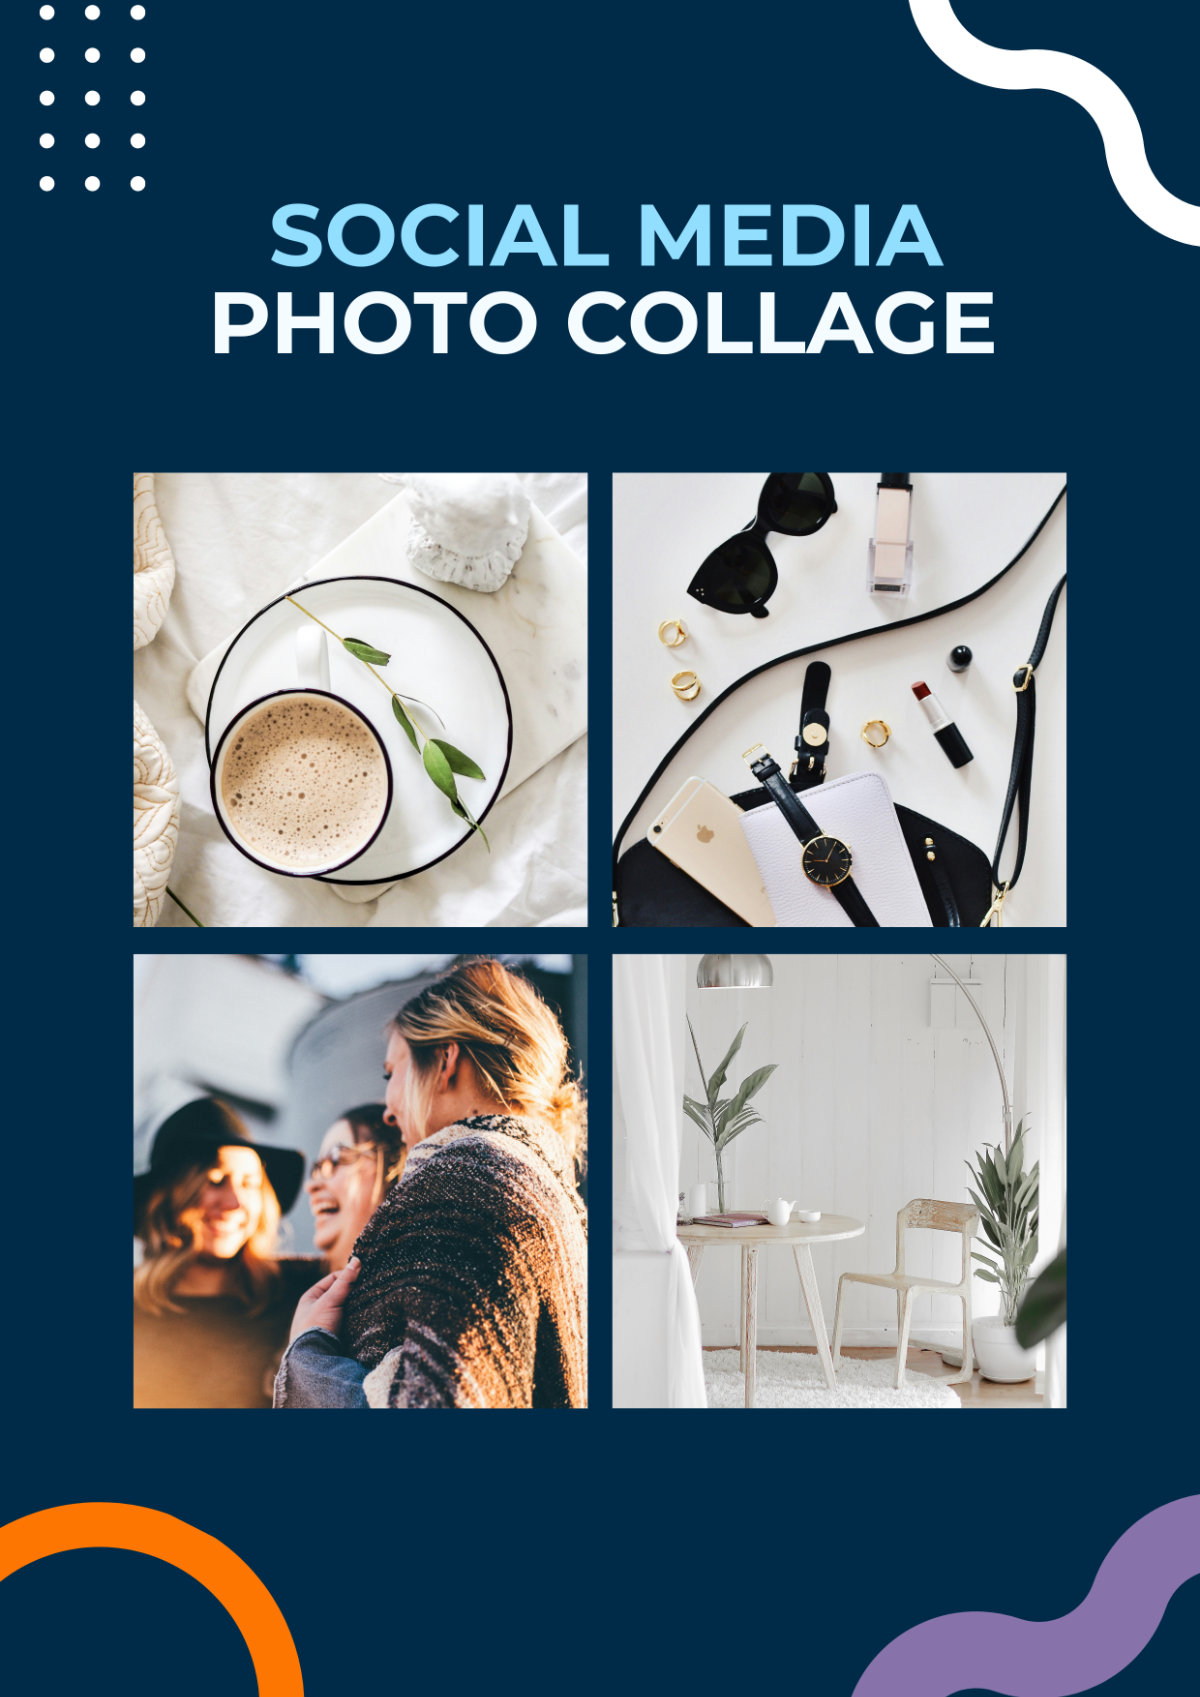 Social Media Photo Collage Template